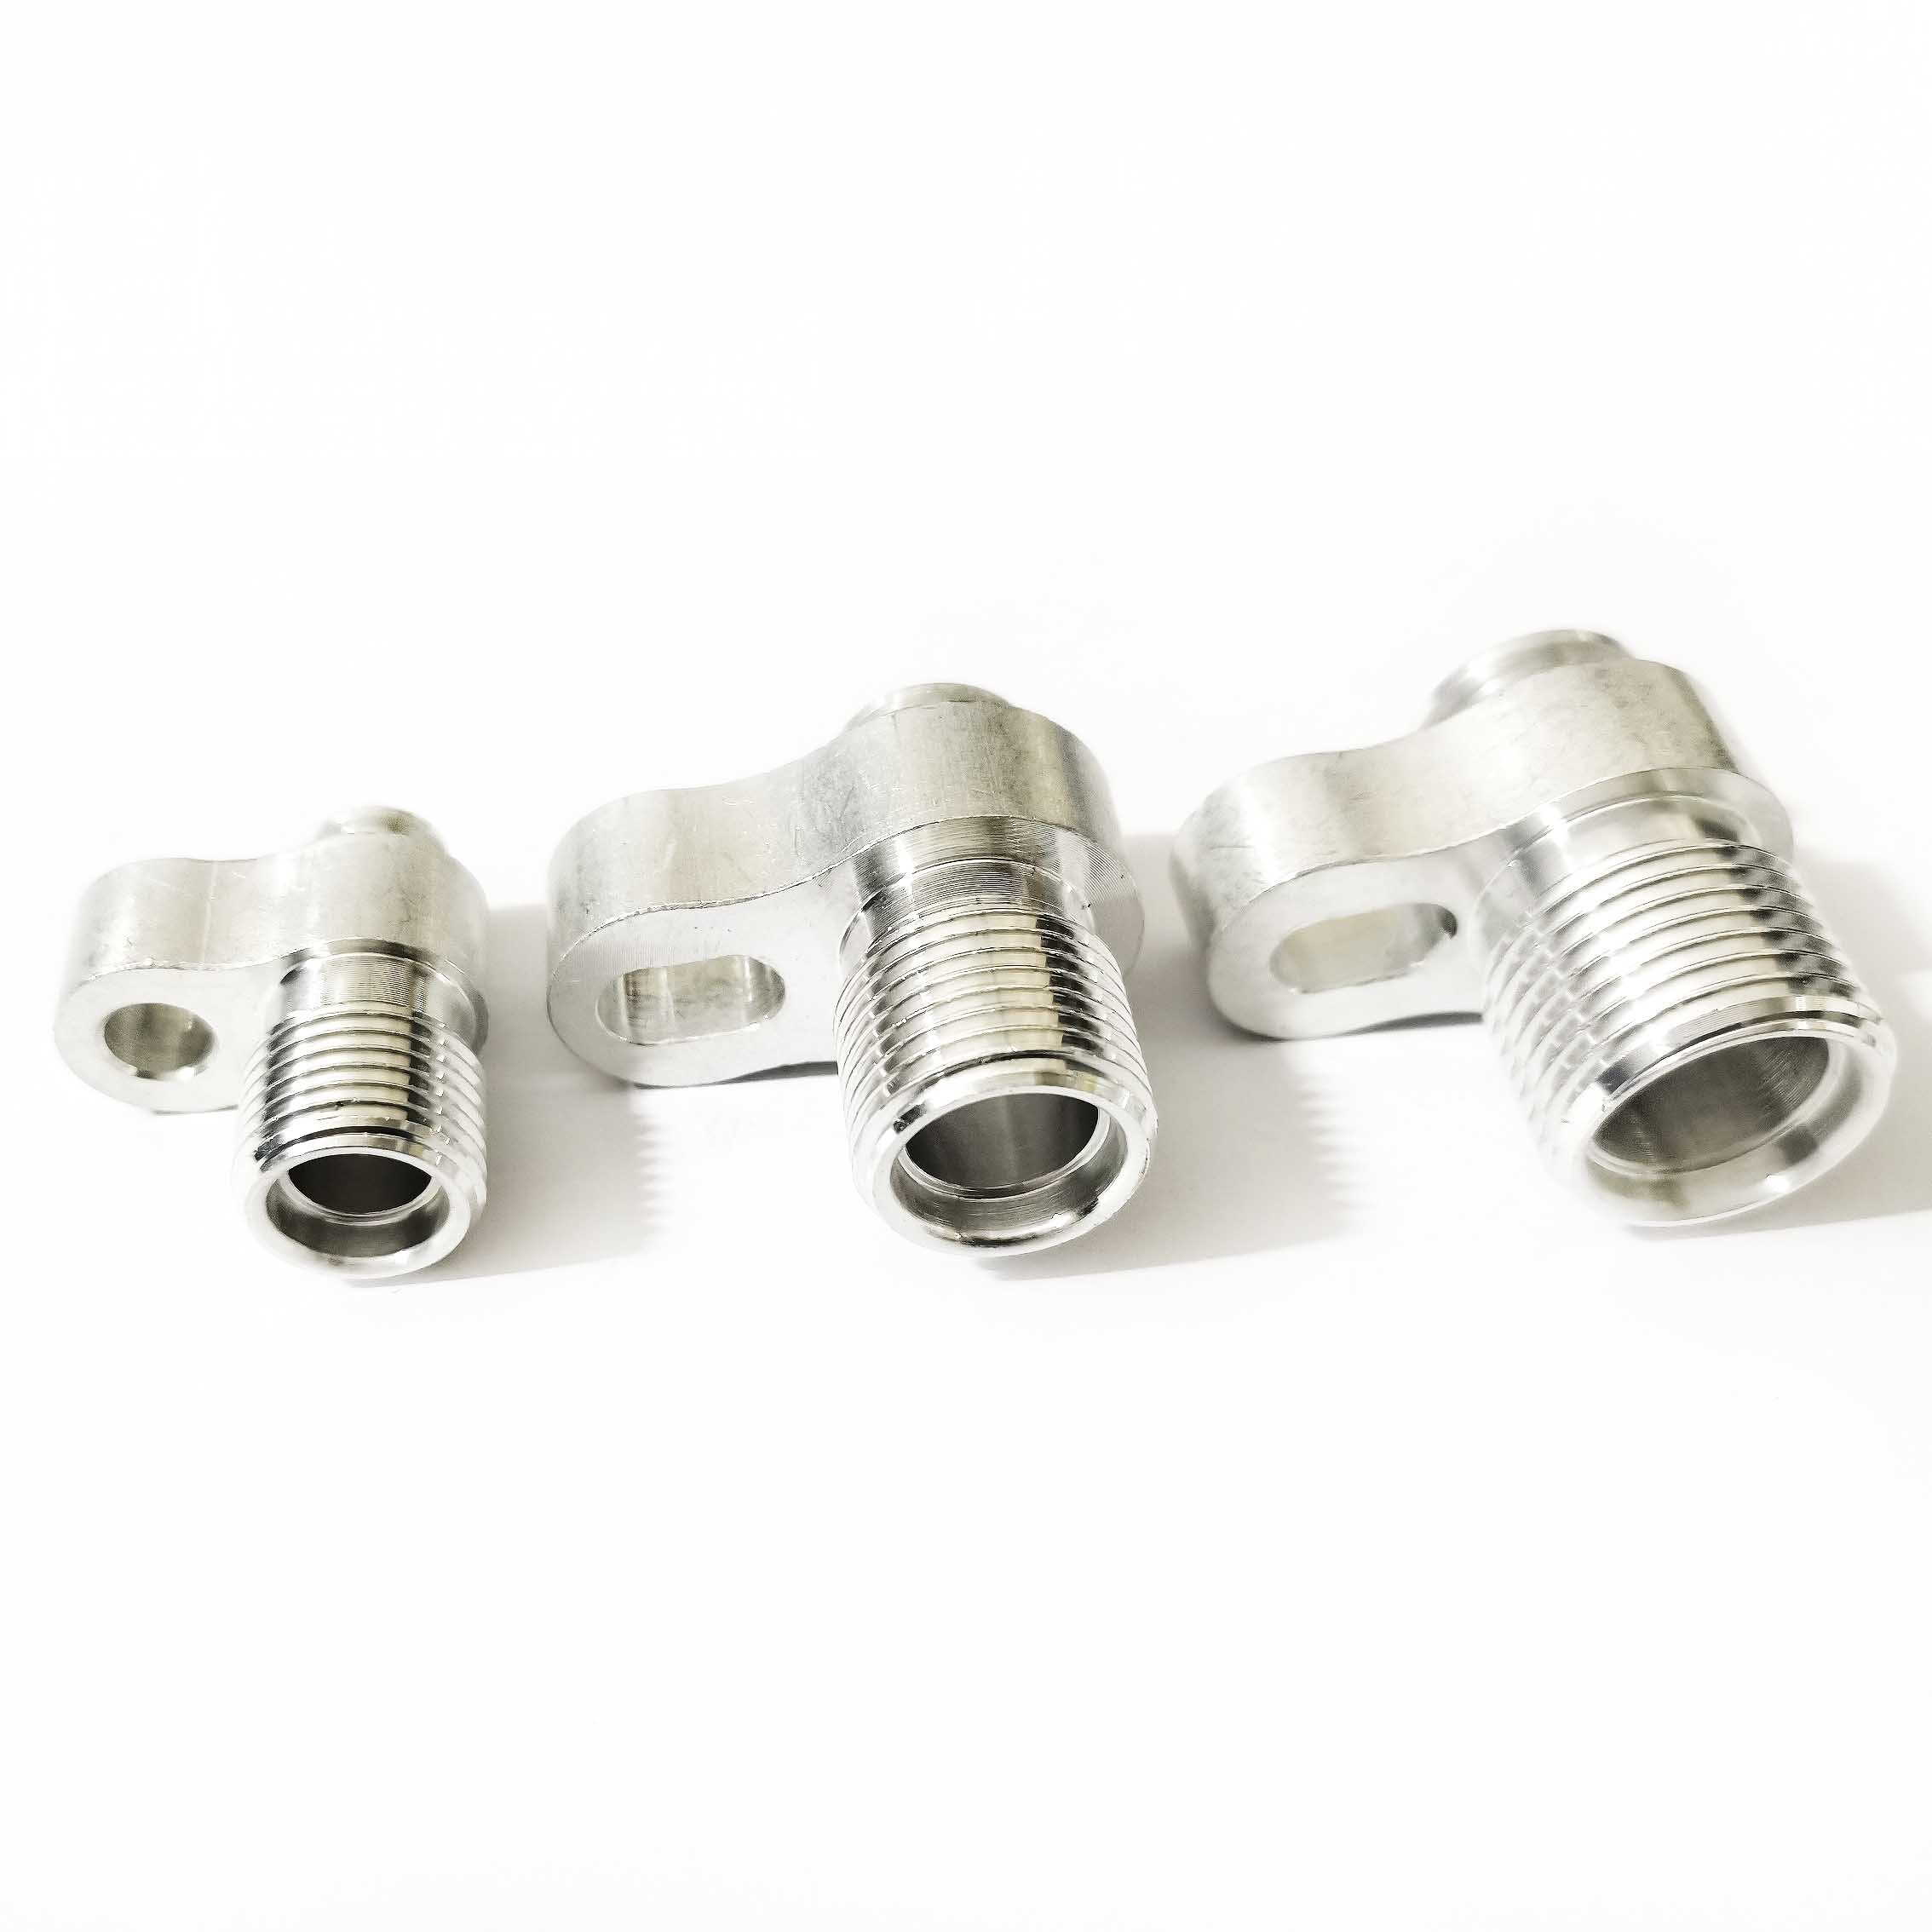 (3PCS) Automotive air conditioning compressor pipe fittings/air conditioning hose aluminum Joints R134a 3/8 1/2 5/8 connector